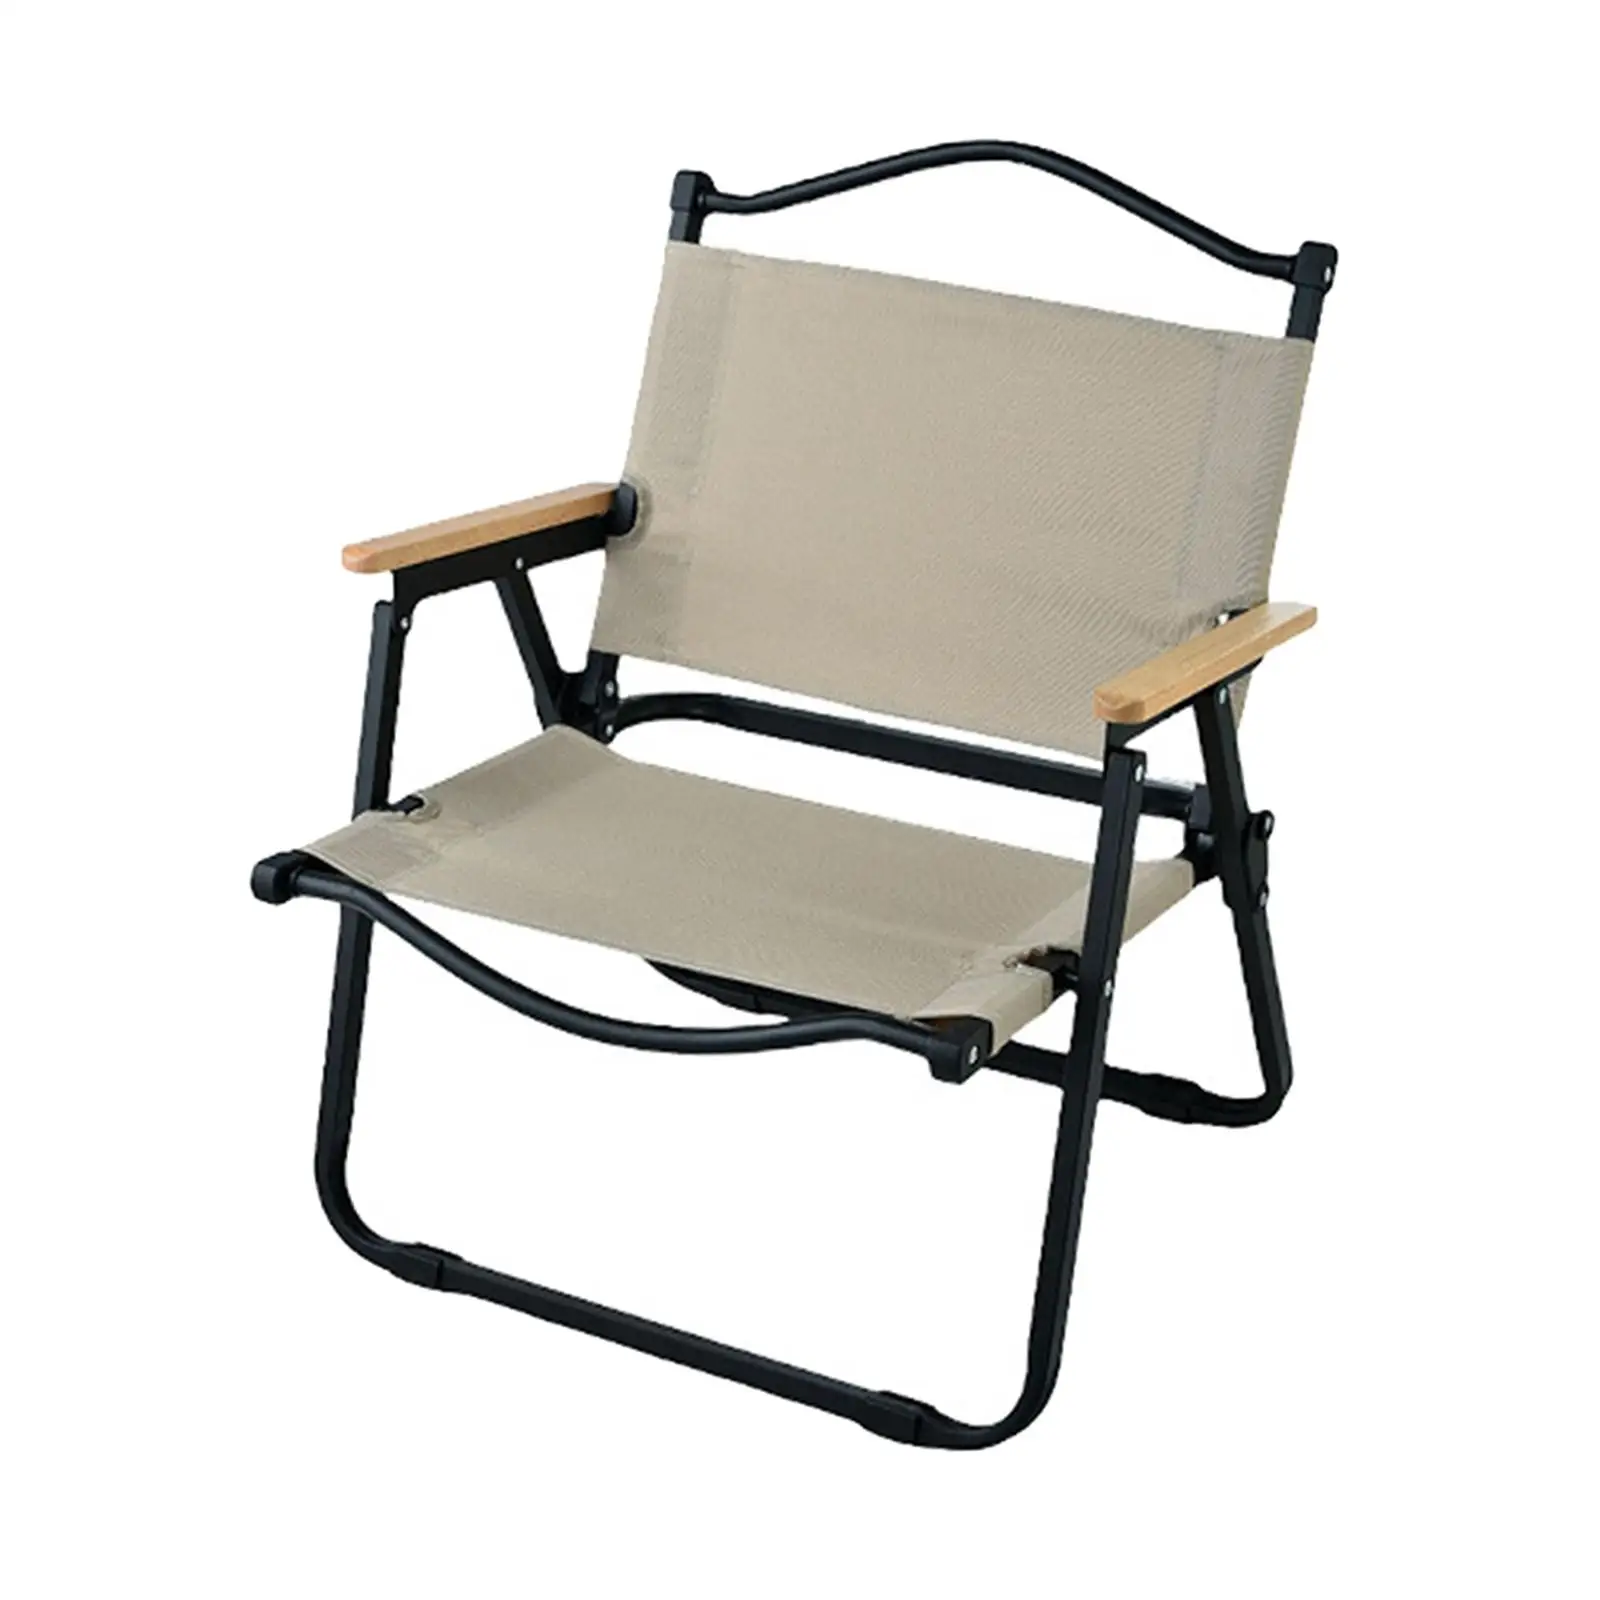 Camping Folding Chair Backrest Chair Portable Holds 330lbs Armchair Outdoor Furniture for Park Lawn Fishing Beach Picnic